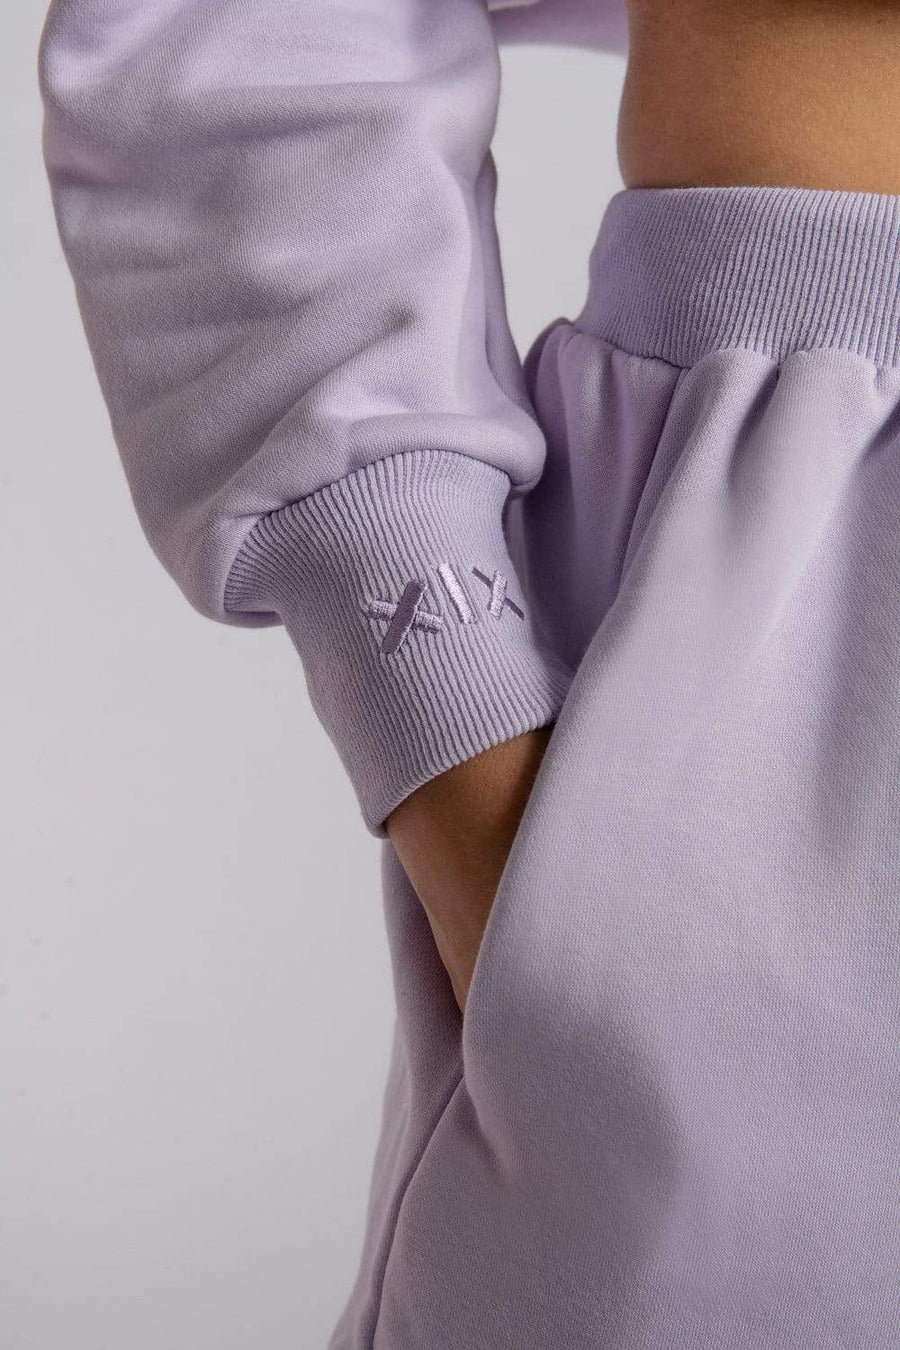 Oversized Cropped Jumper - Lilac Top